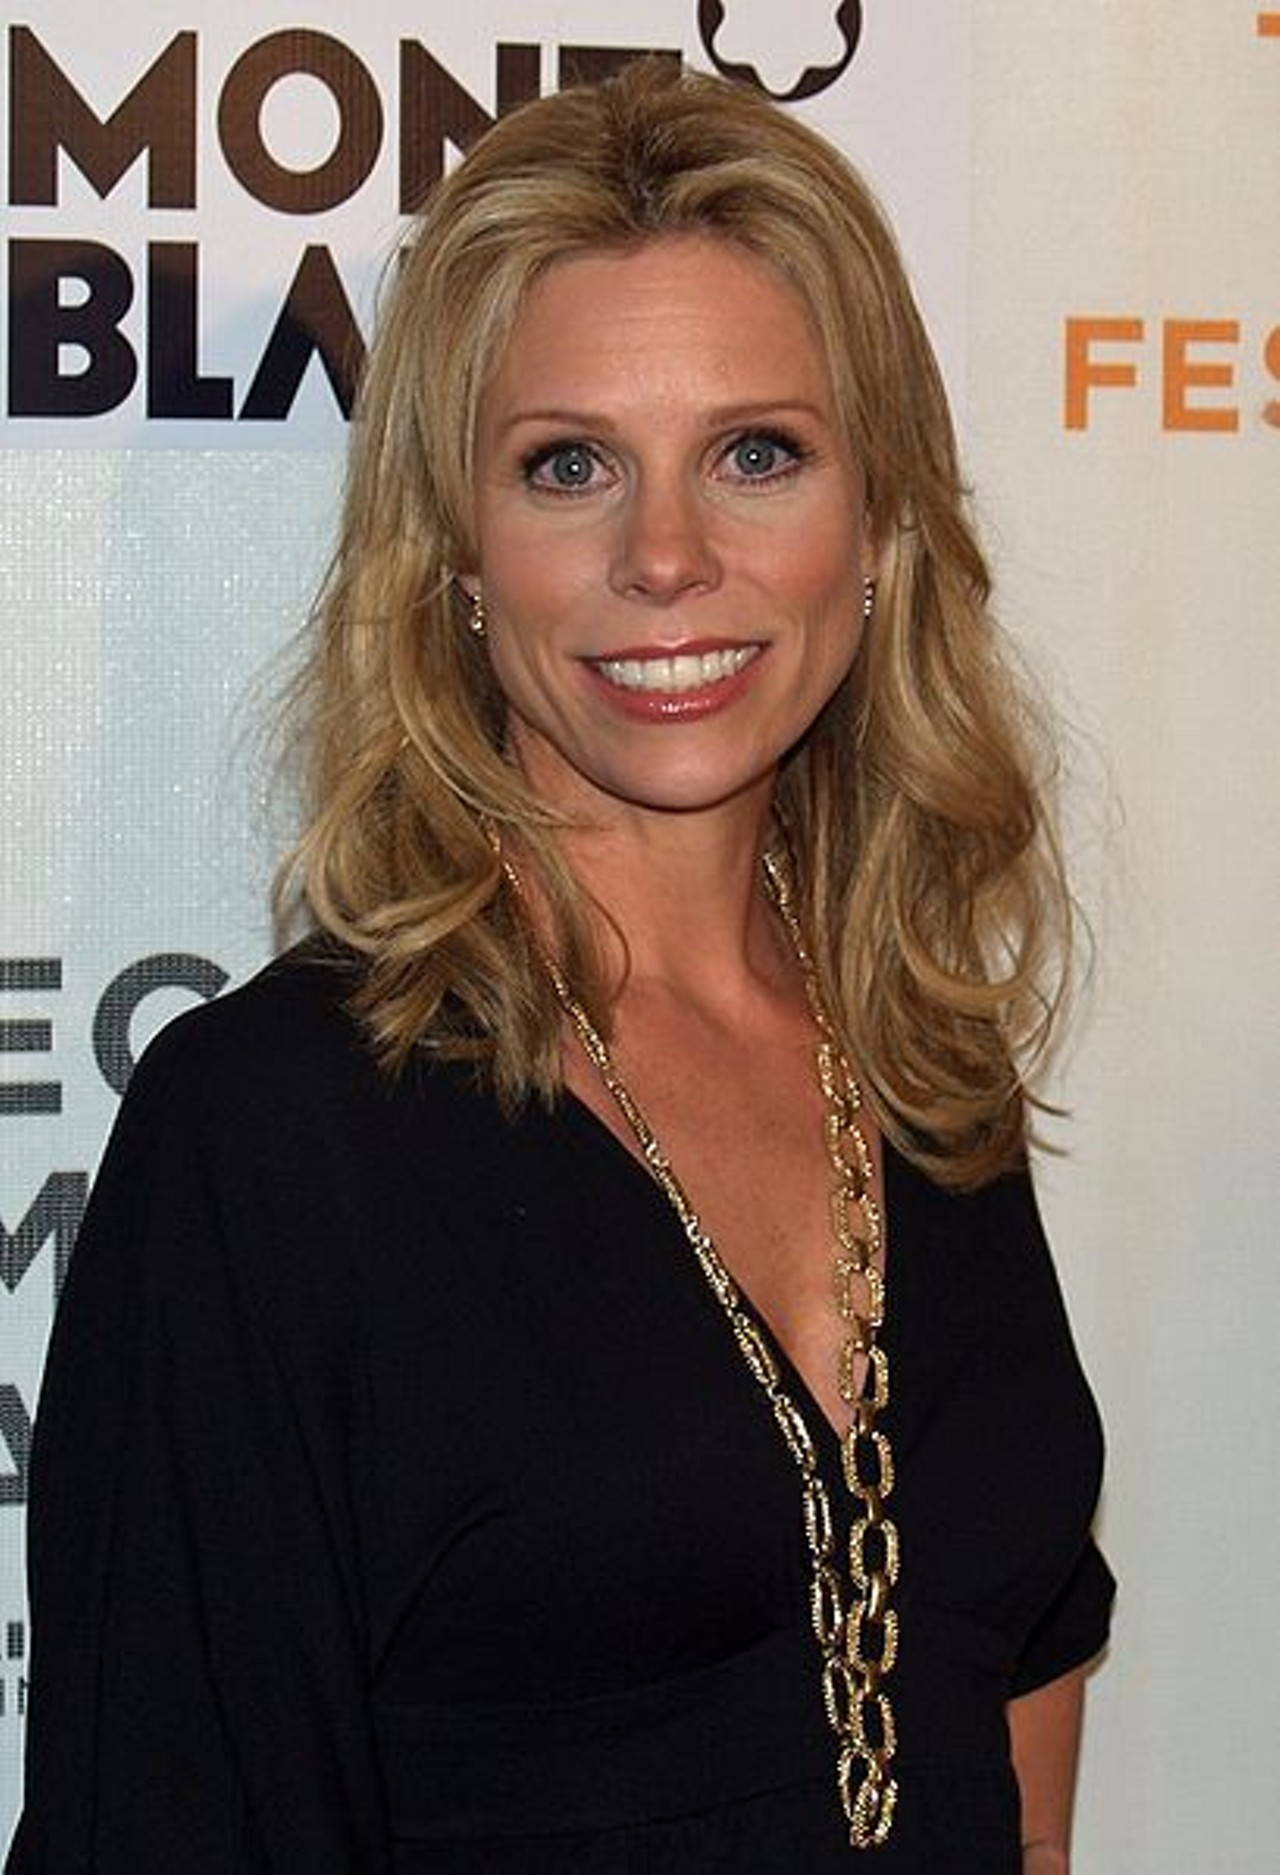 Cheryl Hines- Emmy nominated actress currently appearing in the show Suburgatory.